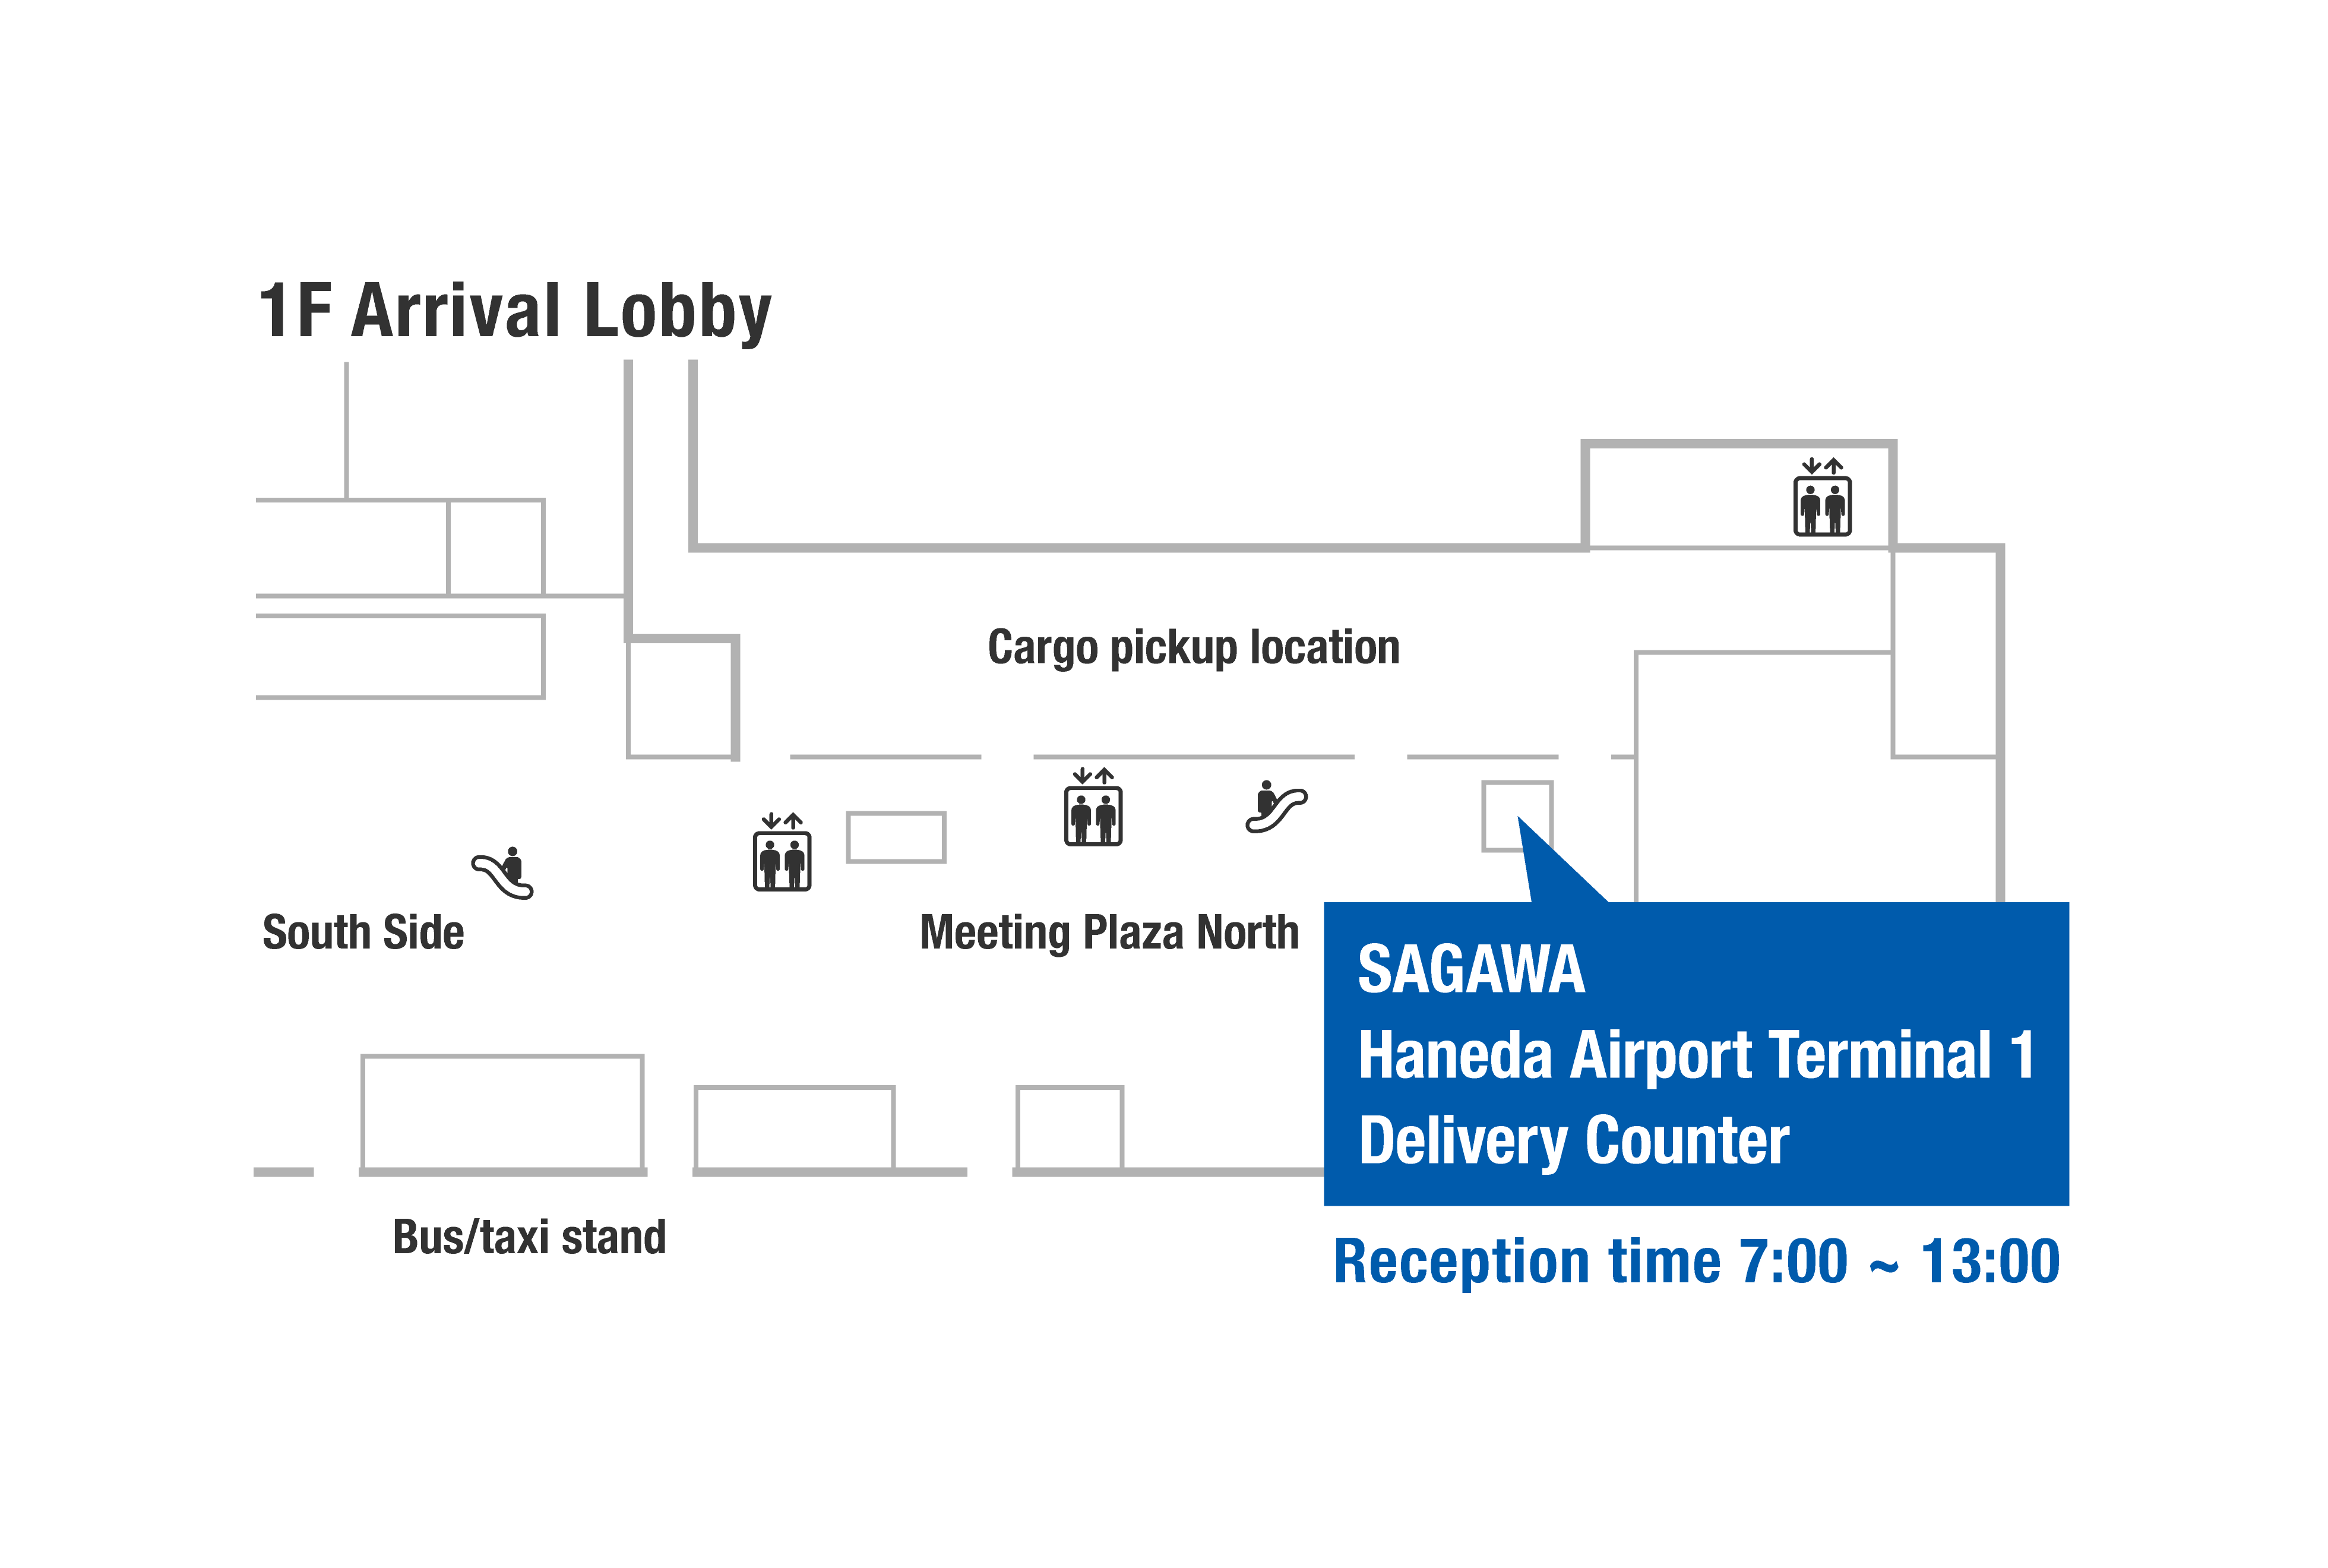 1F Arrival Lobby
Cargo pickup location
South Side
Meeting Plaza North
Bus/taxi stand
SAGAWA Haneda Airport Terminal 1 Delivery Counter
Reception time 7:00 ~ 13:00